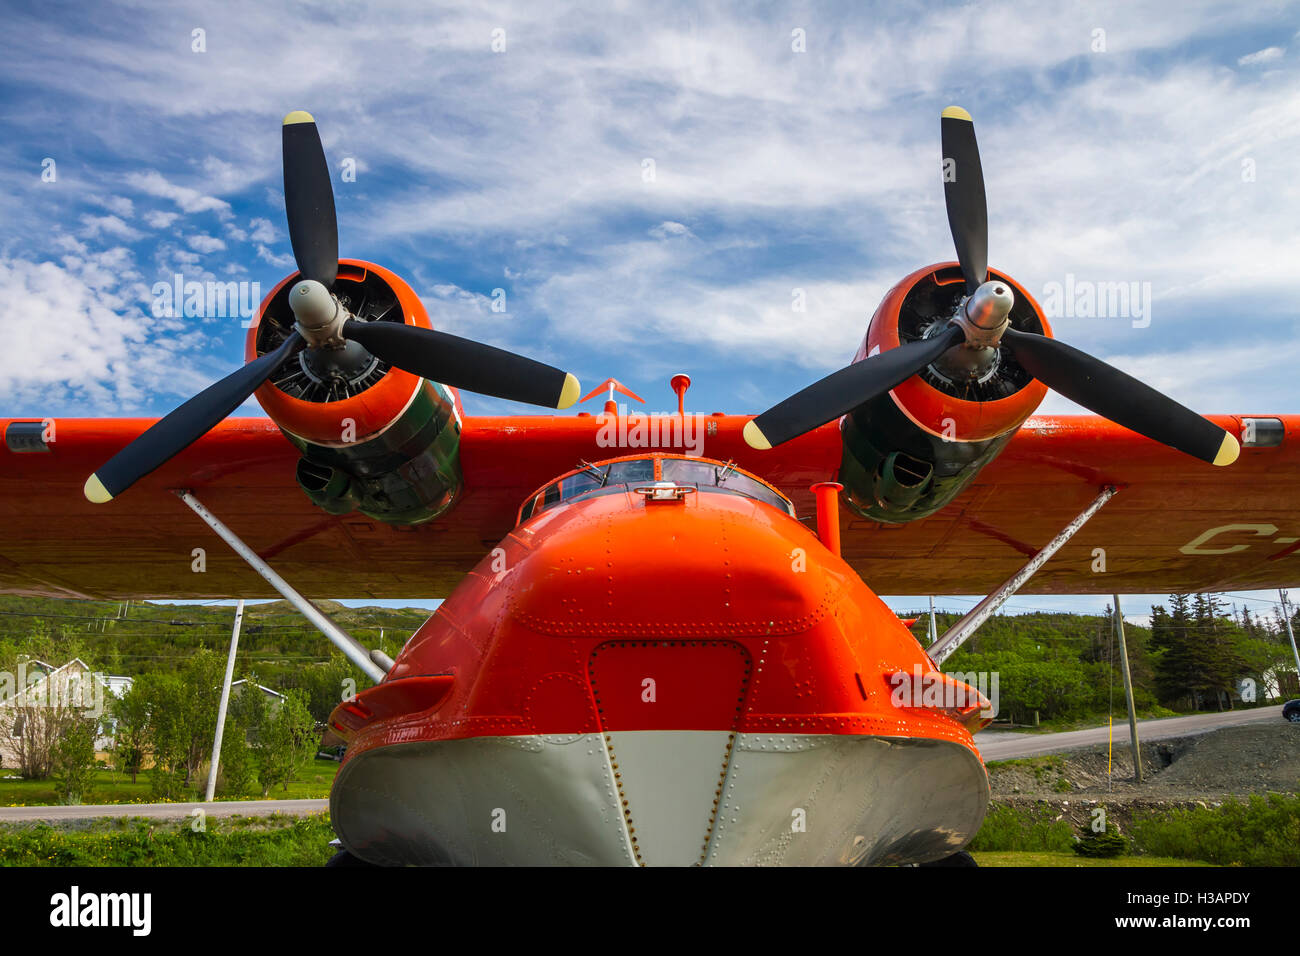 A decommissioned Canso water bomber in Memorial Park, St. Anthony, Newfoundland and Labrador, Canada. Stock Photo